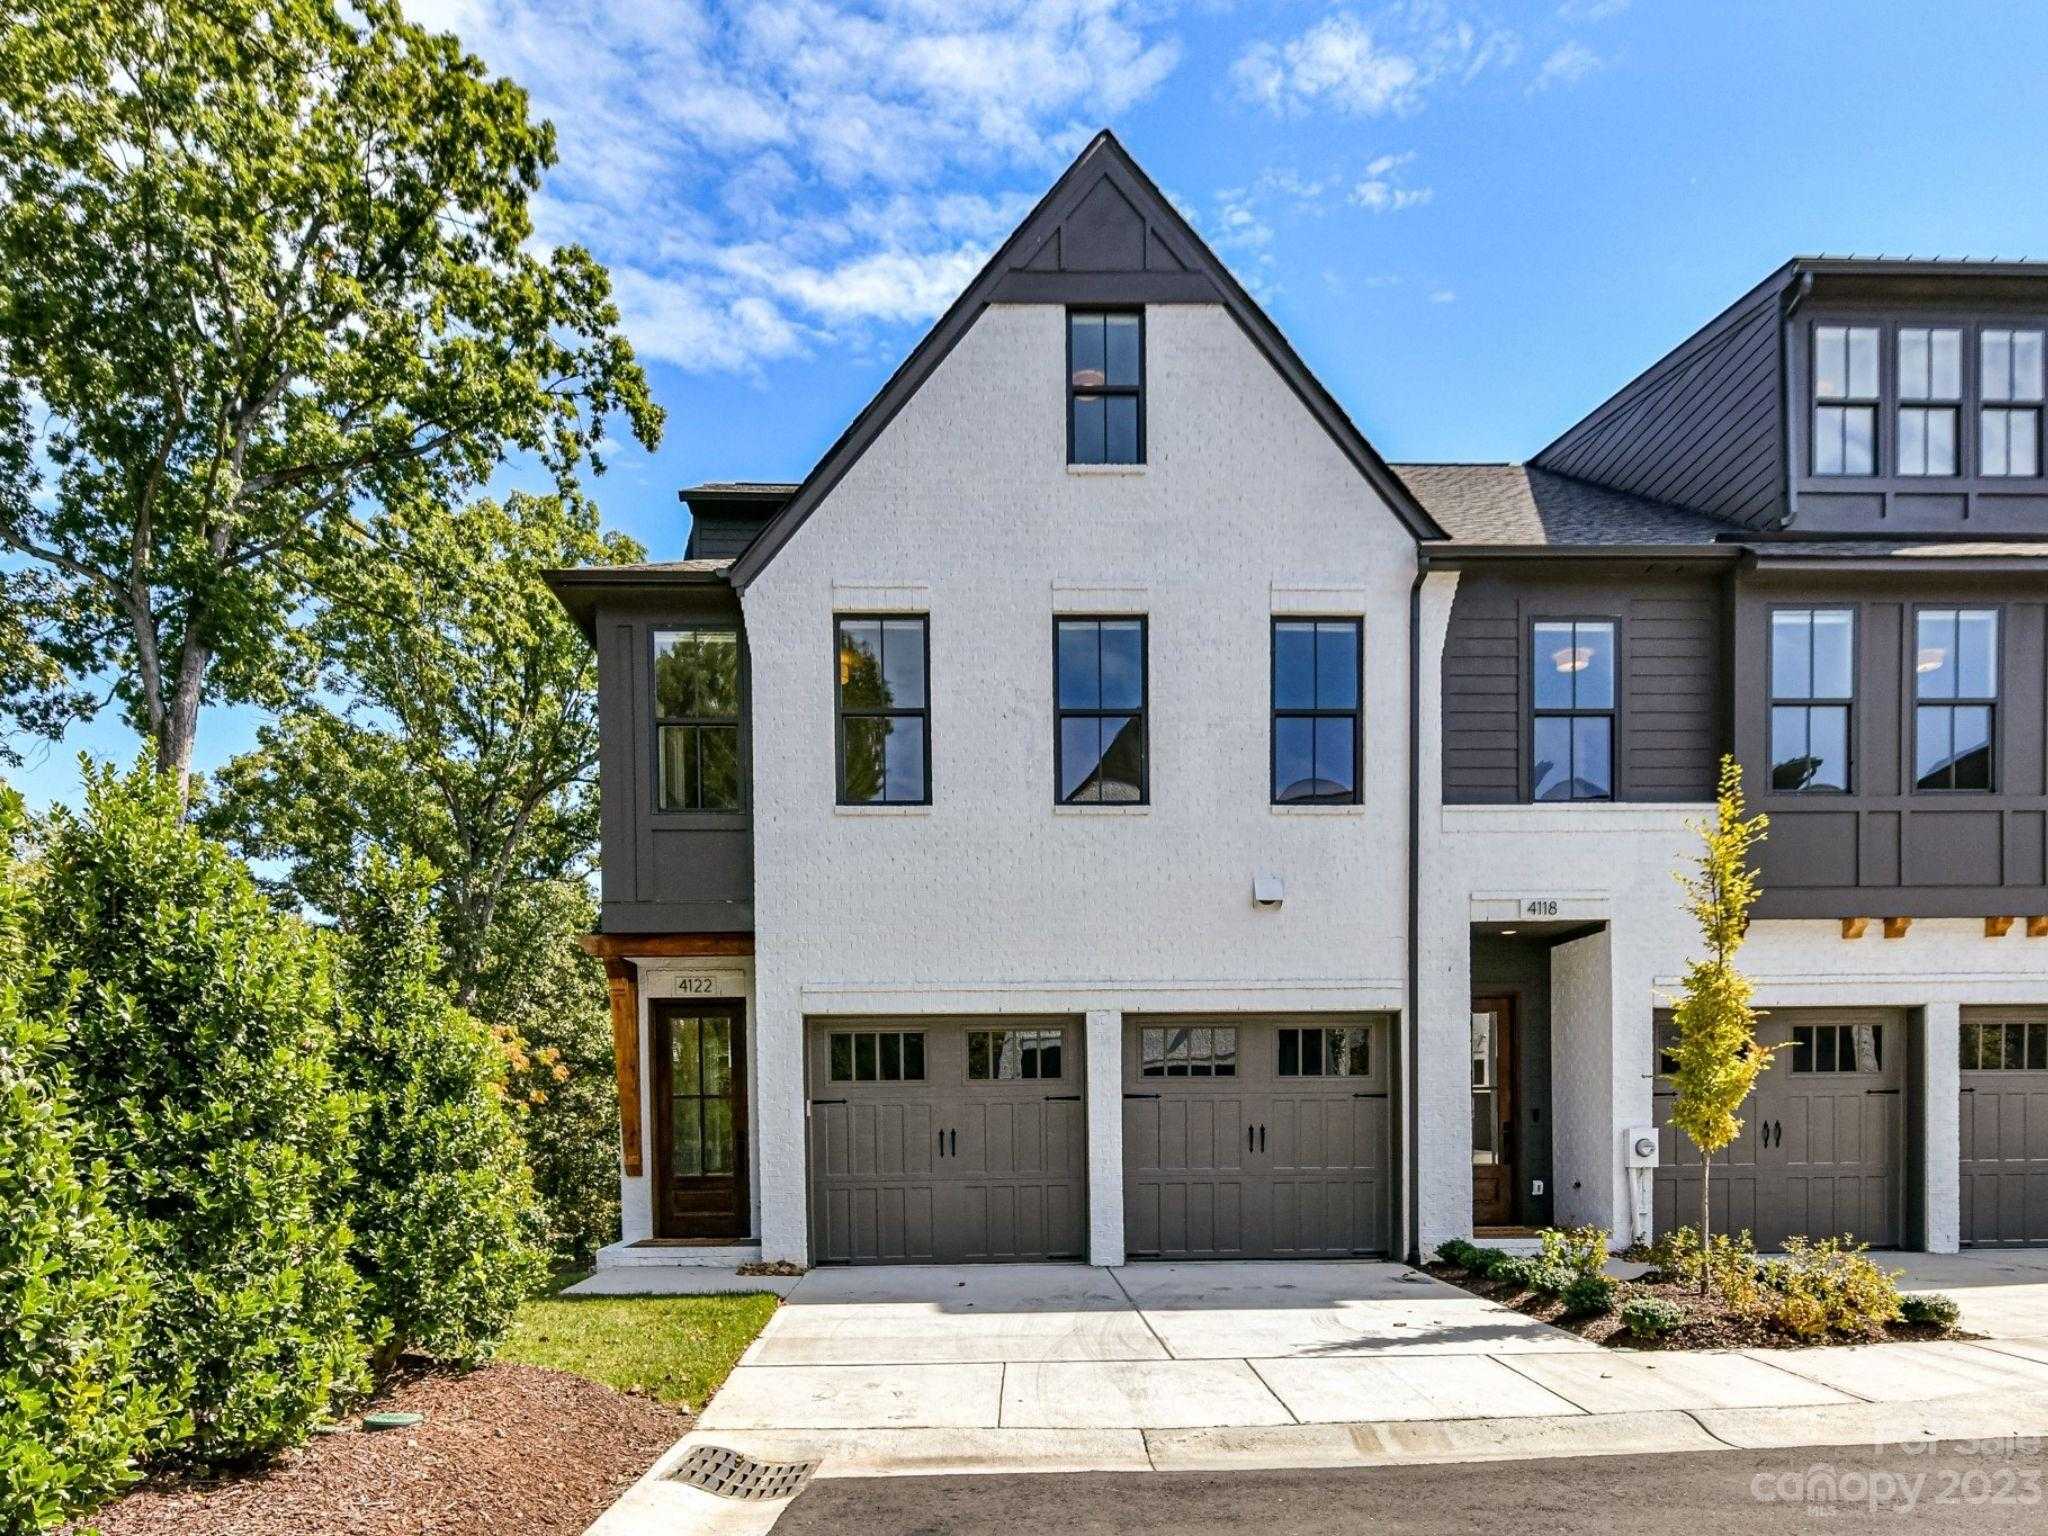 View Charlotte, NC 28209 townhome